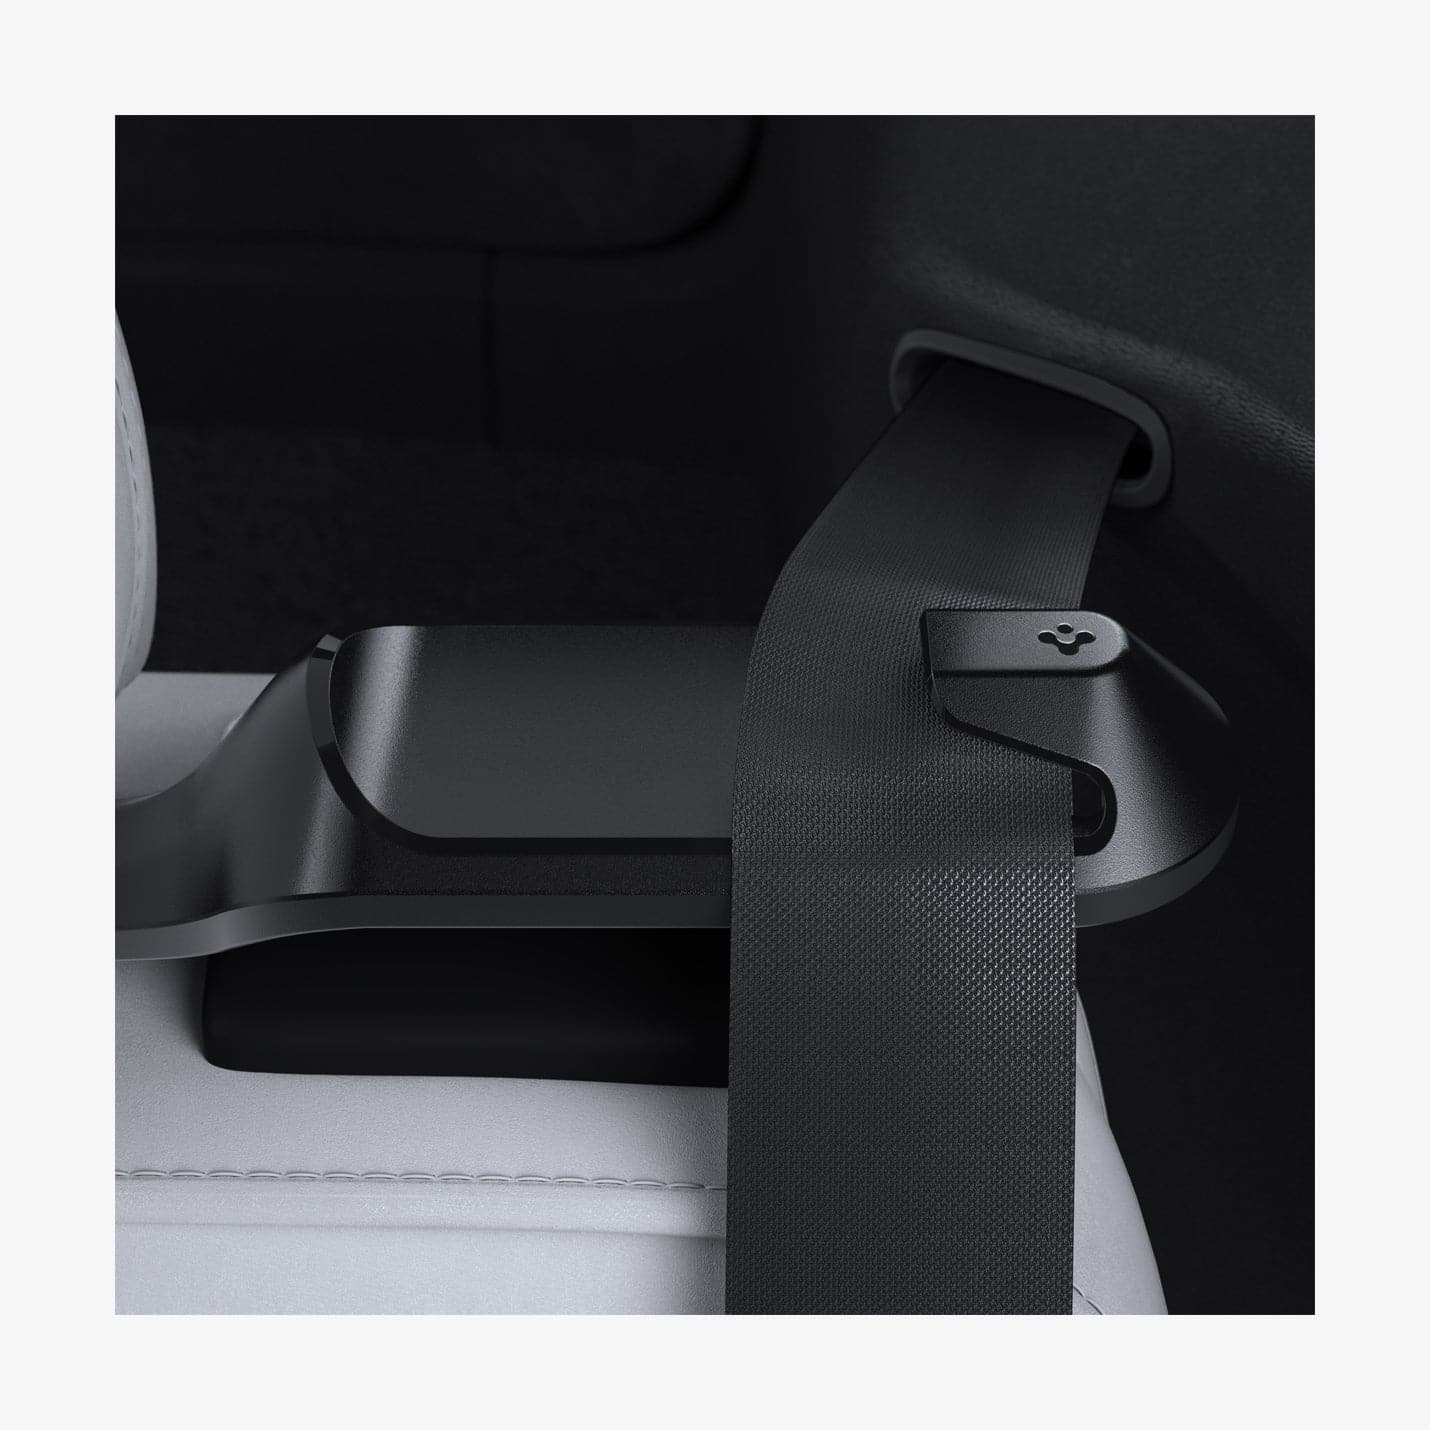 ACP06041 - Tesla Model Y Backseat Seatbelt Guide in black showing the top view of guide installed in car